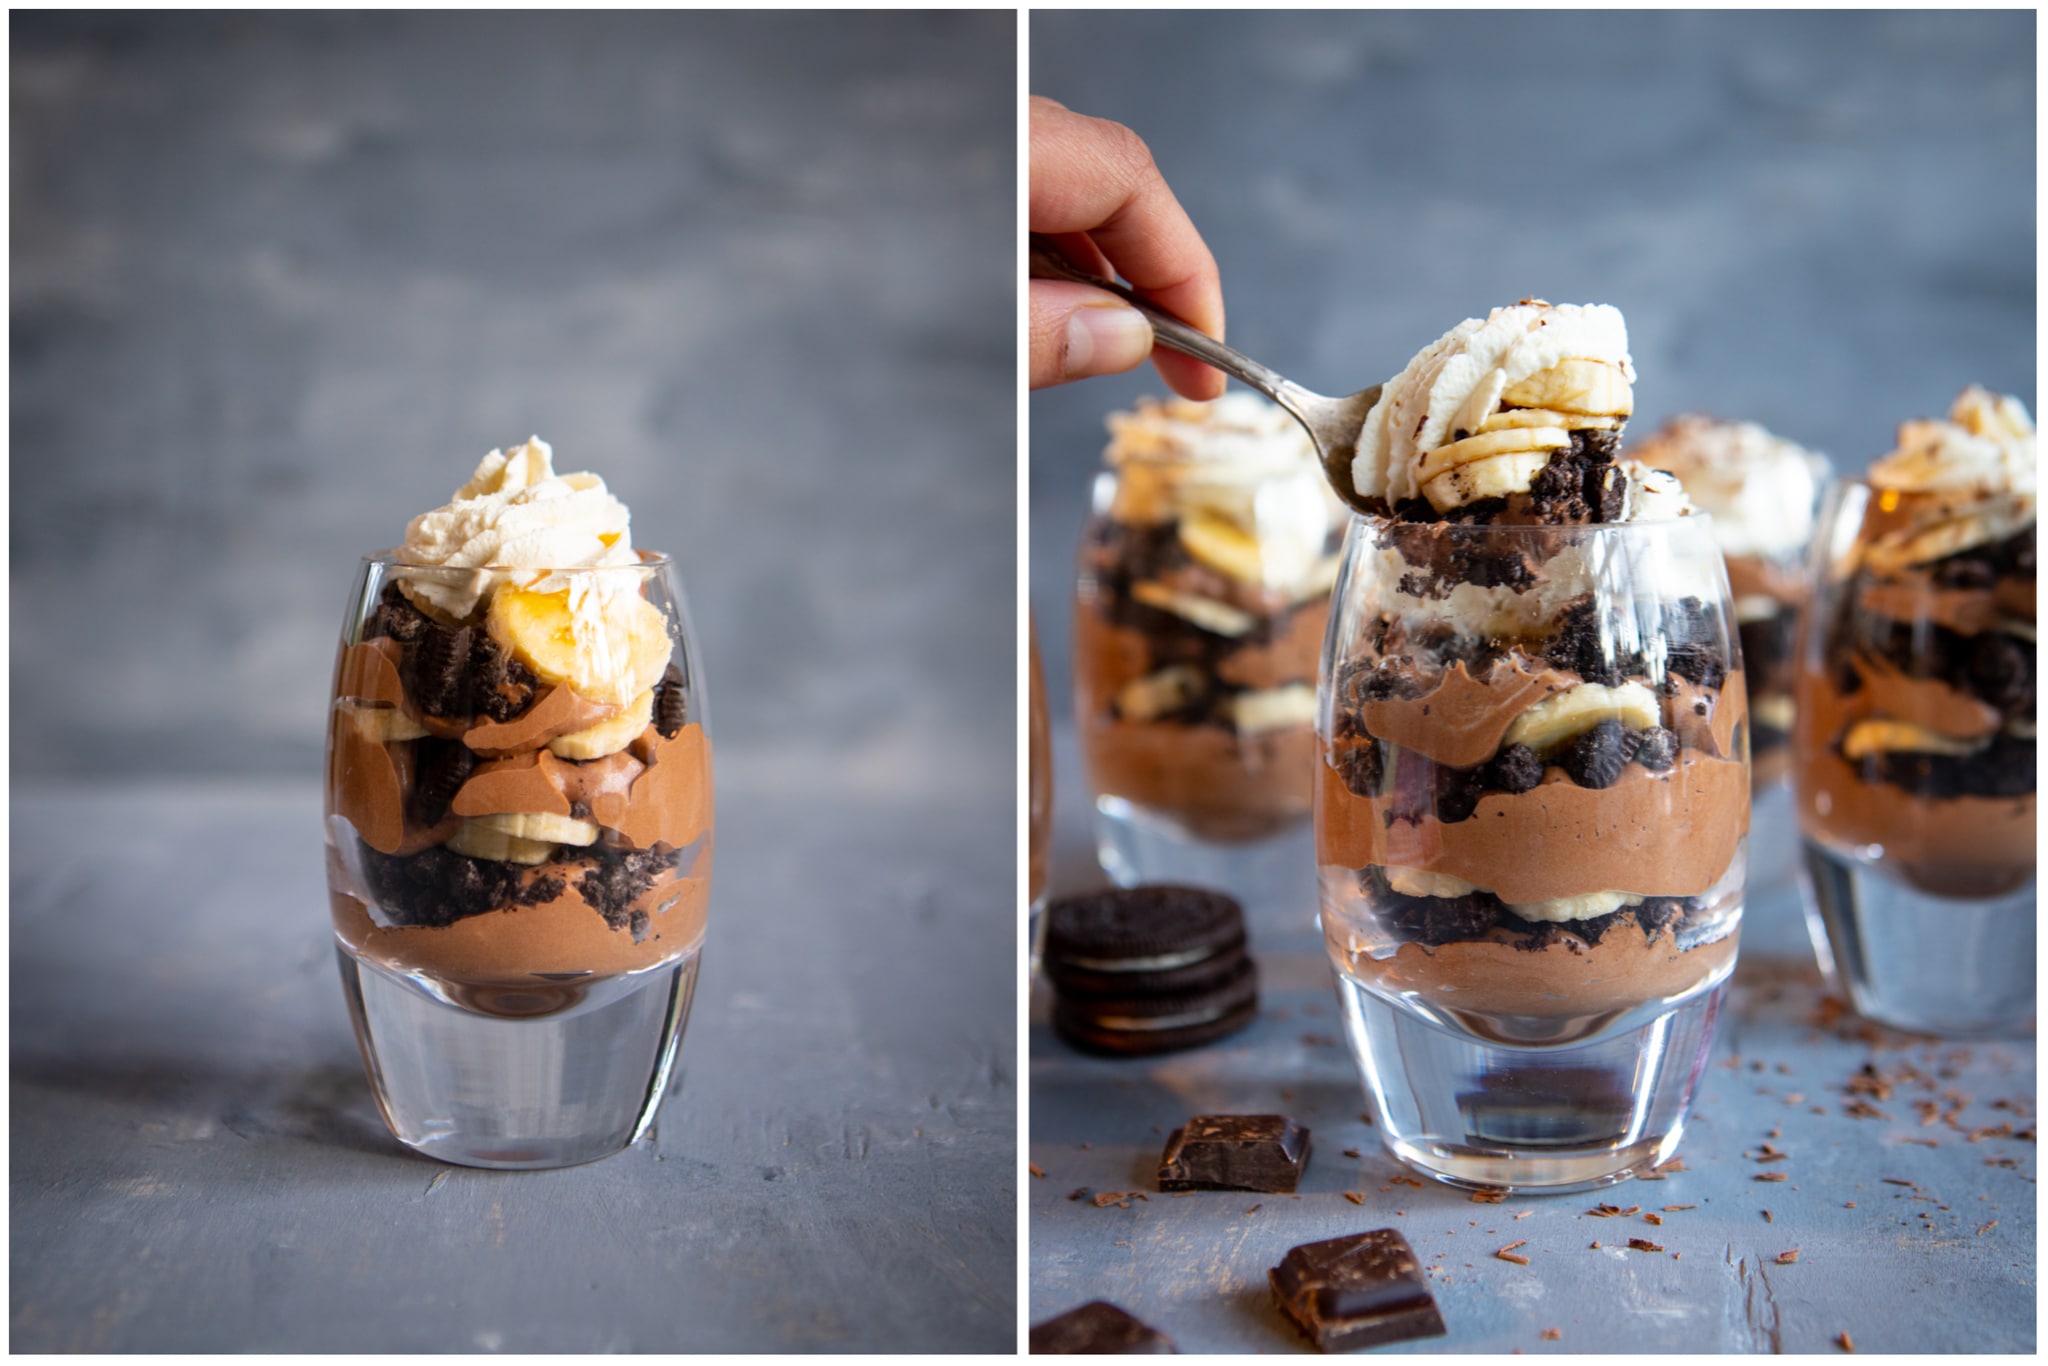 Two photos, side-by-side, of Chocolate Banana Pudding steps further in the process. On the left, a finished Chocolate Banana Pudding with layers of mousse, cookie crumbs, and bananas, topped with whipped cream. On the right, the finished Chocolate Banana Pudding, with someone taking a spoonful off the top ready to eat!